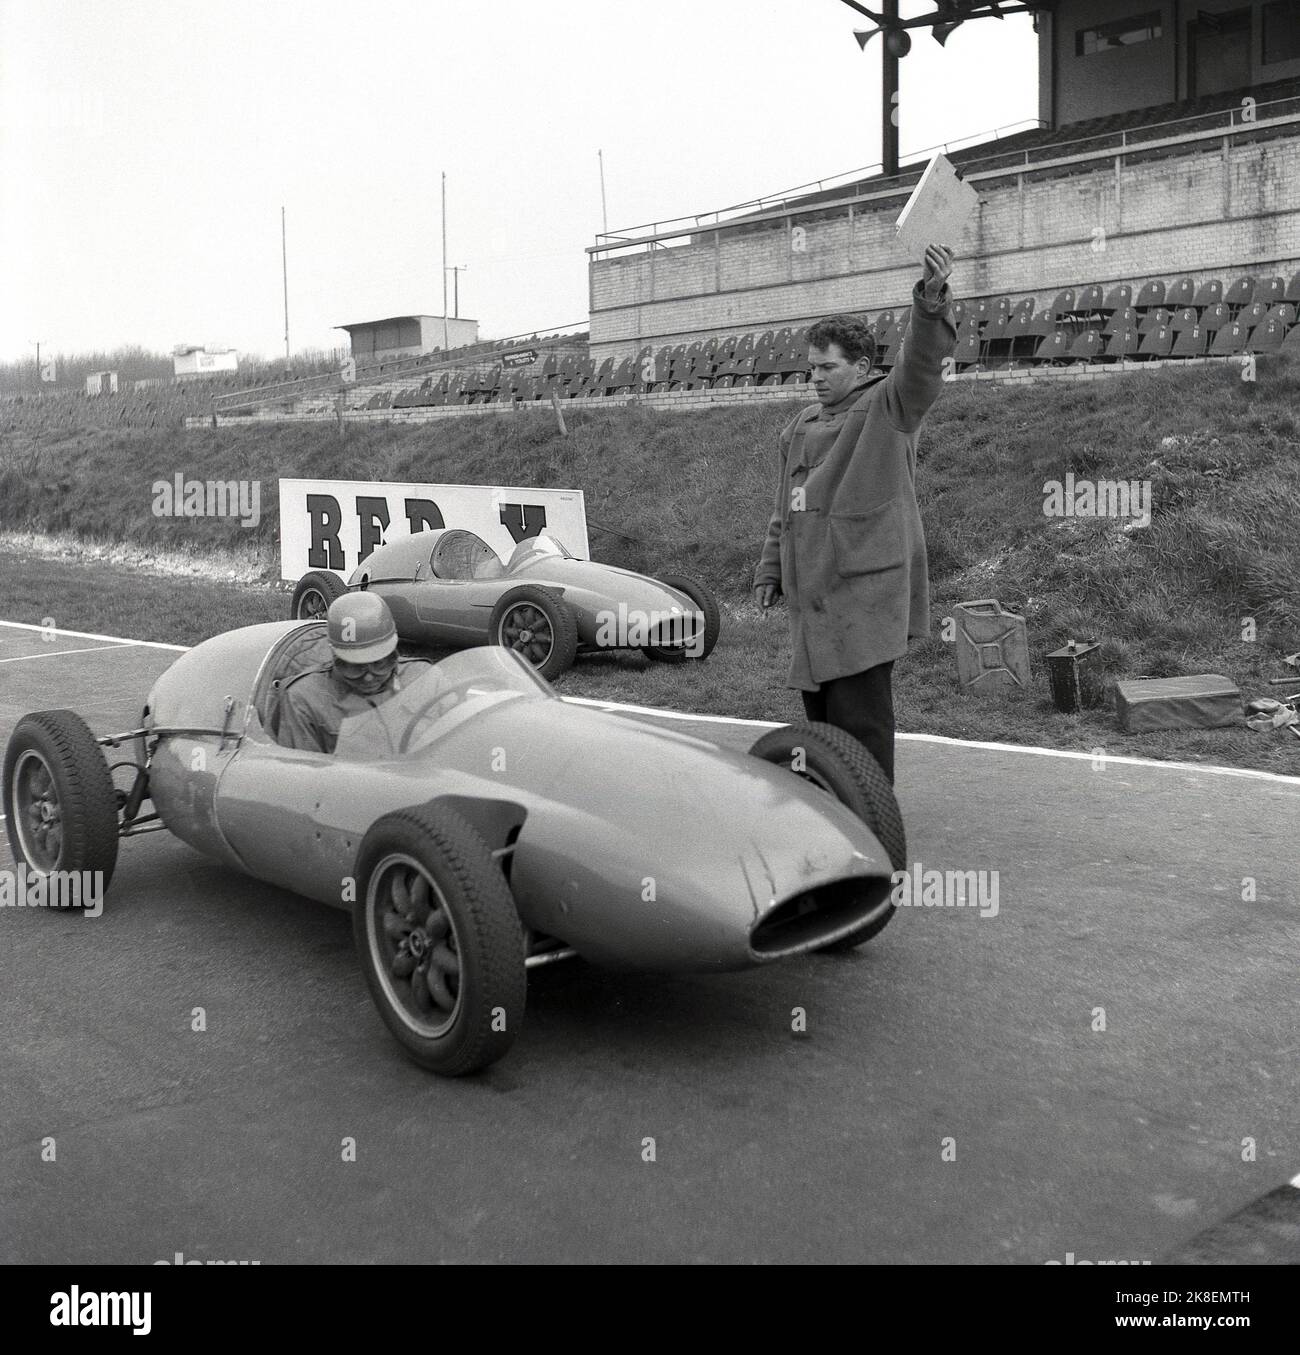 1959, historical, motor racing, Cooper Driving School, a racing driver in an open top, single-seater, a Formula Cooper Junior. on the race track at Brands Hatch, Kent, England, UK, about to start.  Official standing by car holding a small clip board. A legendary name in motor sport, Coopers reached the highest level becoming Formula One Constructor World Champions in 1959 & 1960, the first ever winners in a rear-engined car. At this time, the British based Cooper Car Company was the world’s largest specialist manufacturer of racing cars and their 'Mini Cooper' led the way in Stock Photo